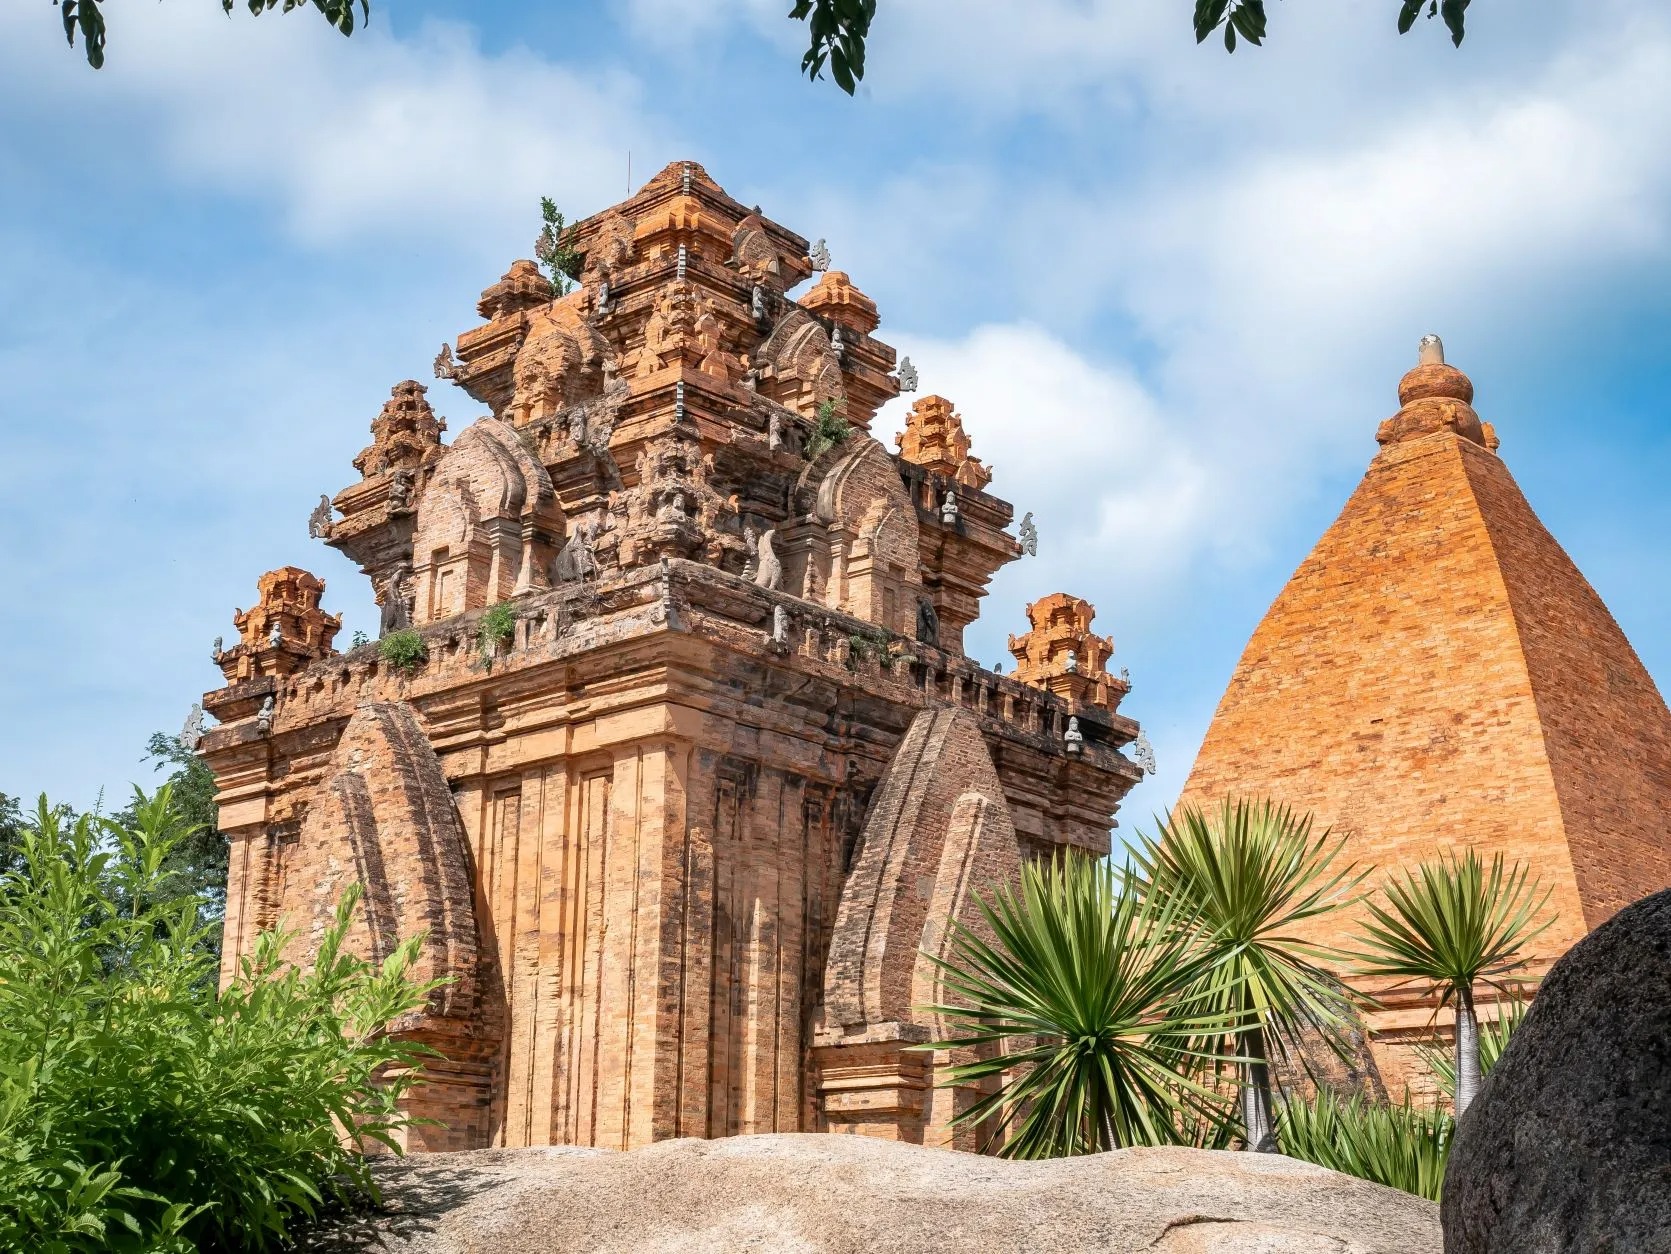 Tháp Bà Ponagar Tower - Ancient Temple, featuring staggered brick design, a niche created by the Champa Kingdom. 